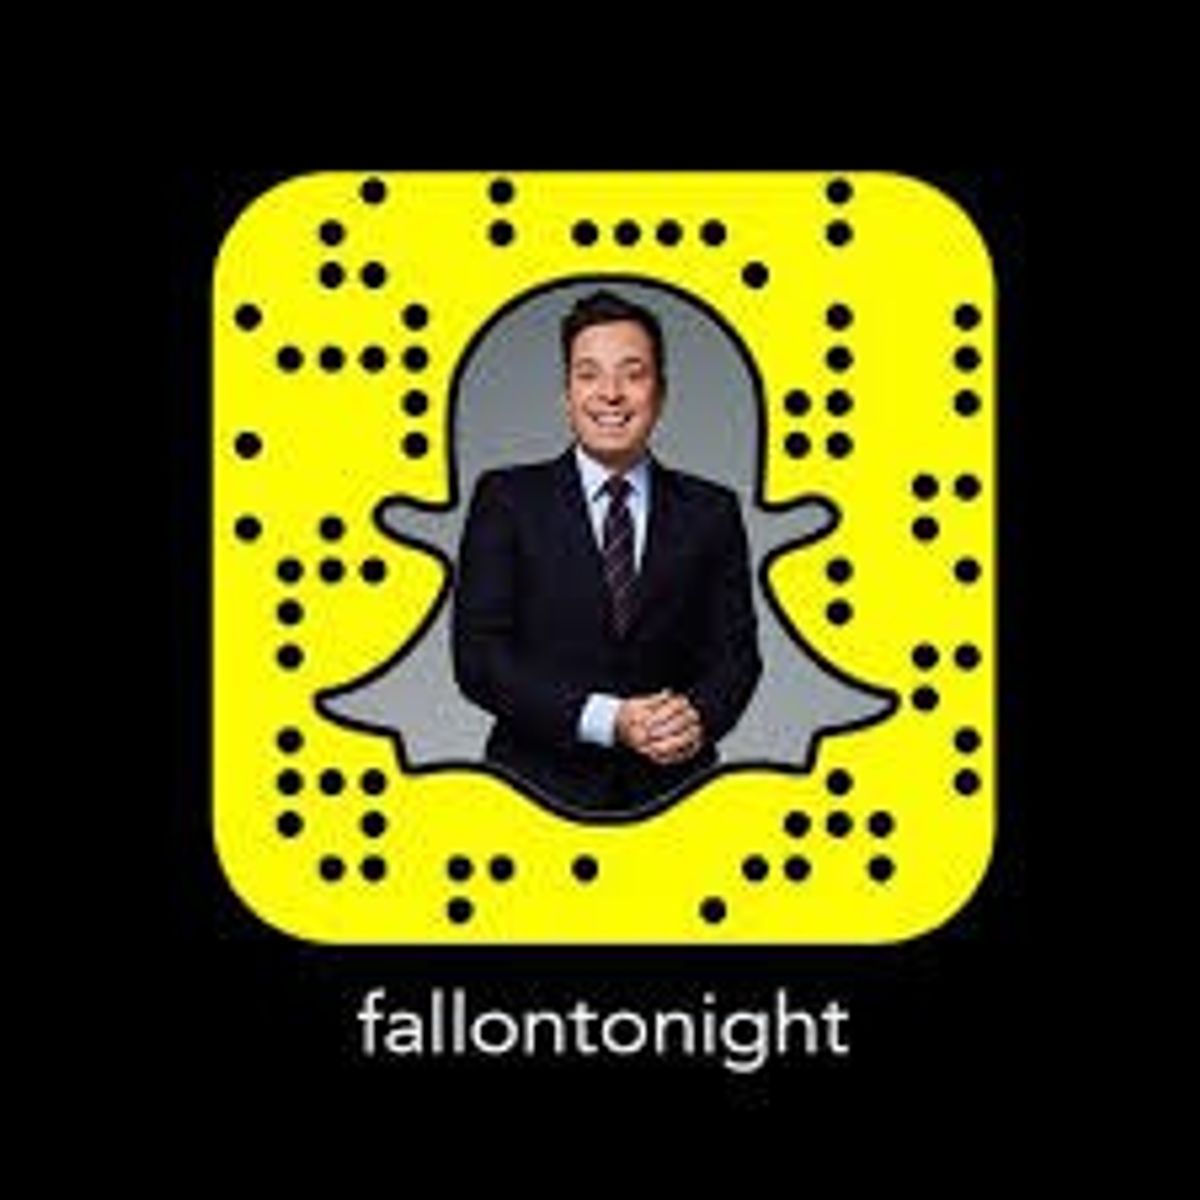 The 6 Faces Of Freshman Year, As Shown By Jimmy Fallon